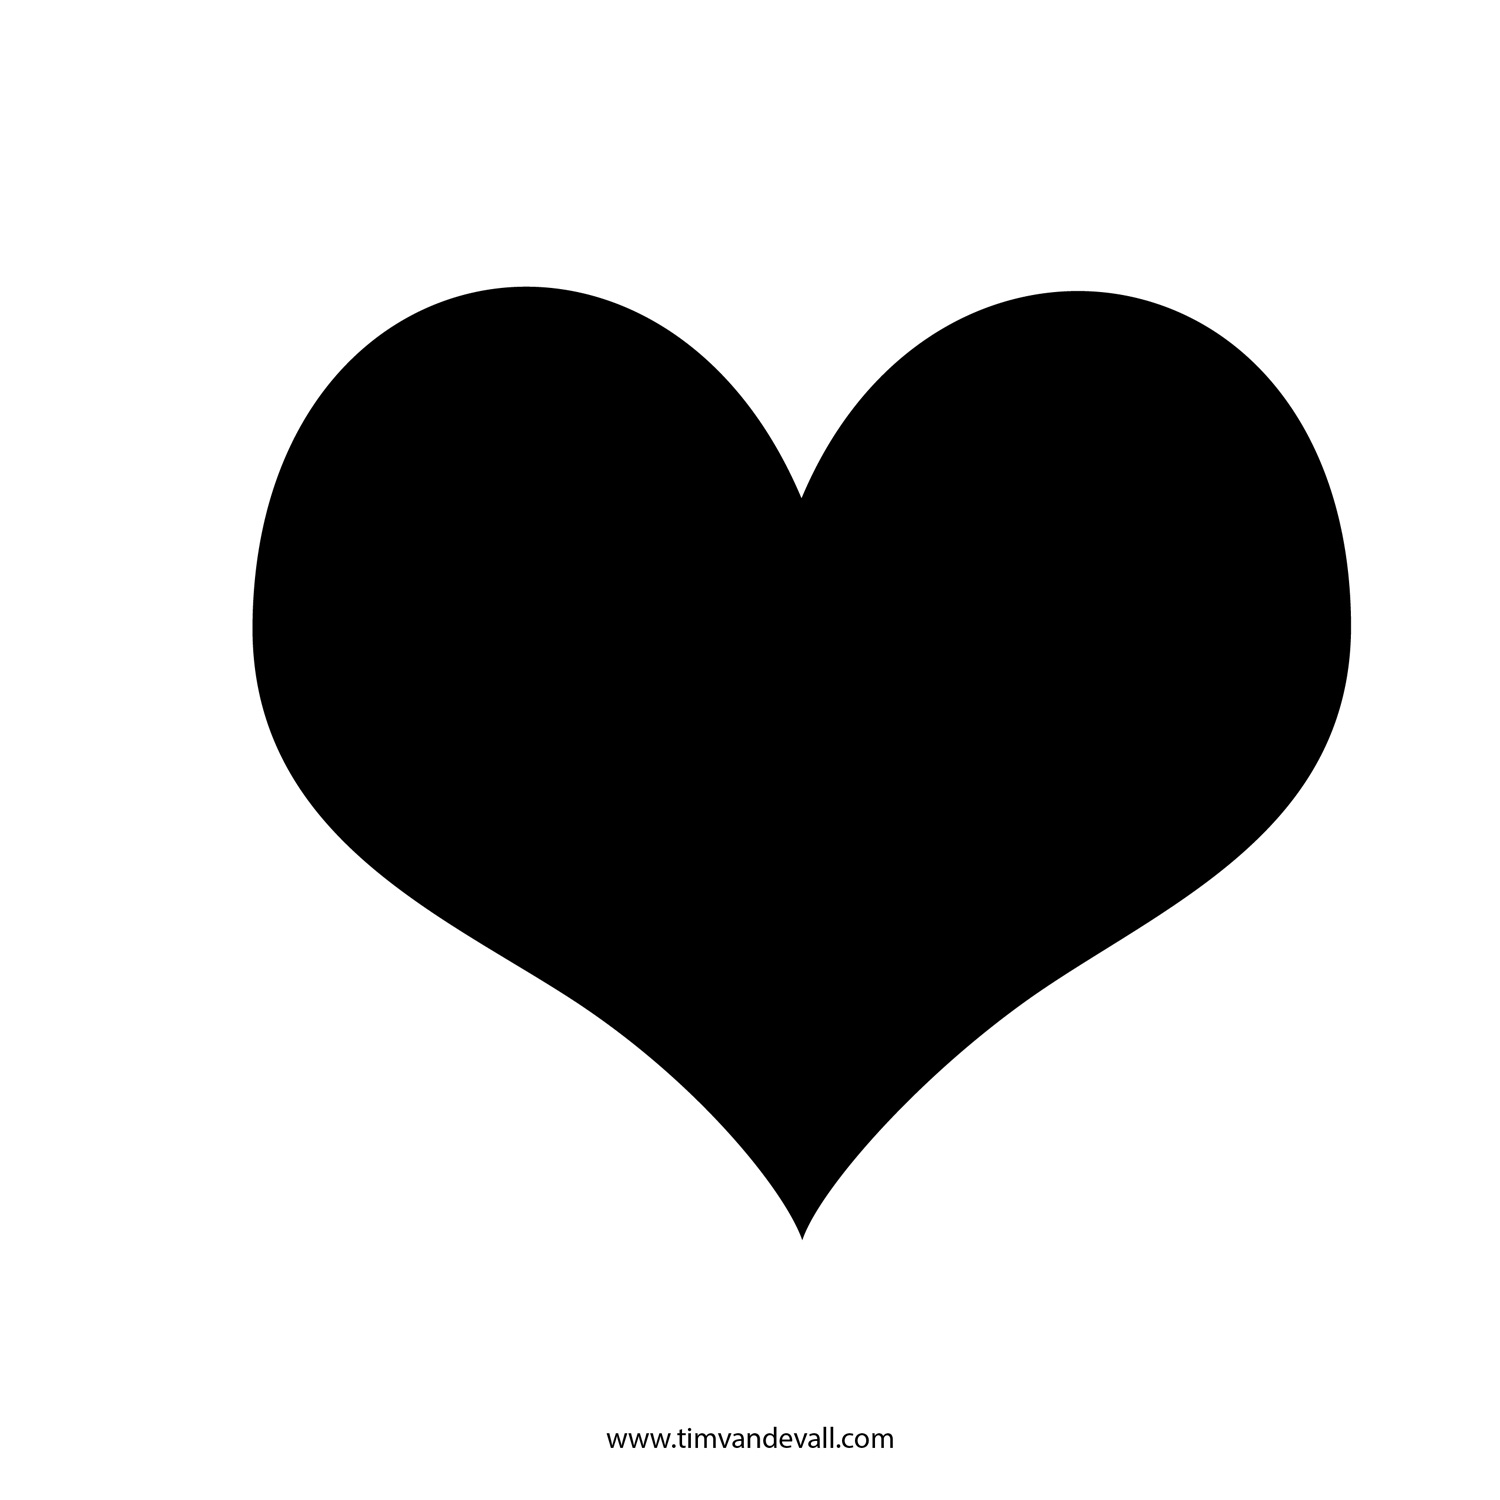 Prinable Heart Stencil| Free Heart Silhouette Template